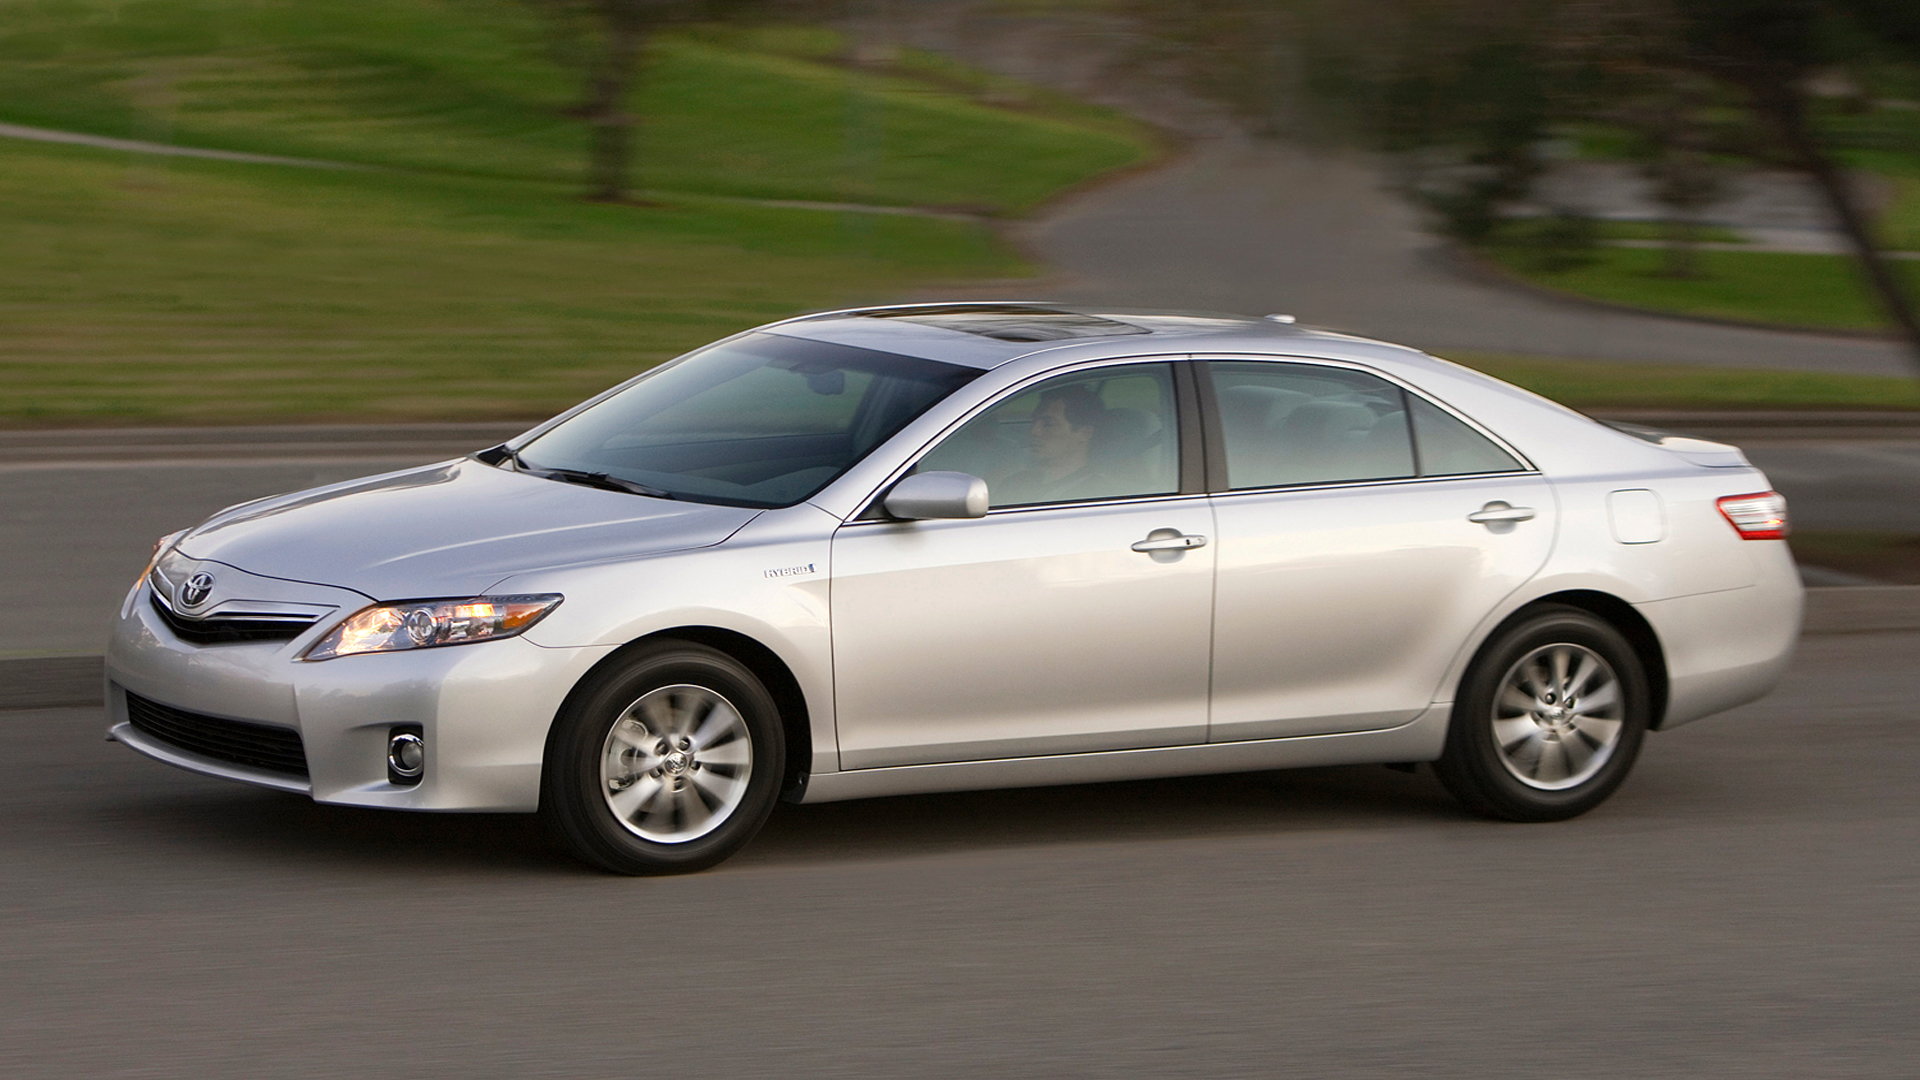 Toyota Camry 2002-2011: How to Convert to Disc Brakes | Camryforums